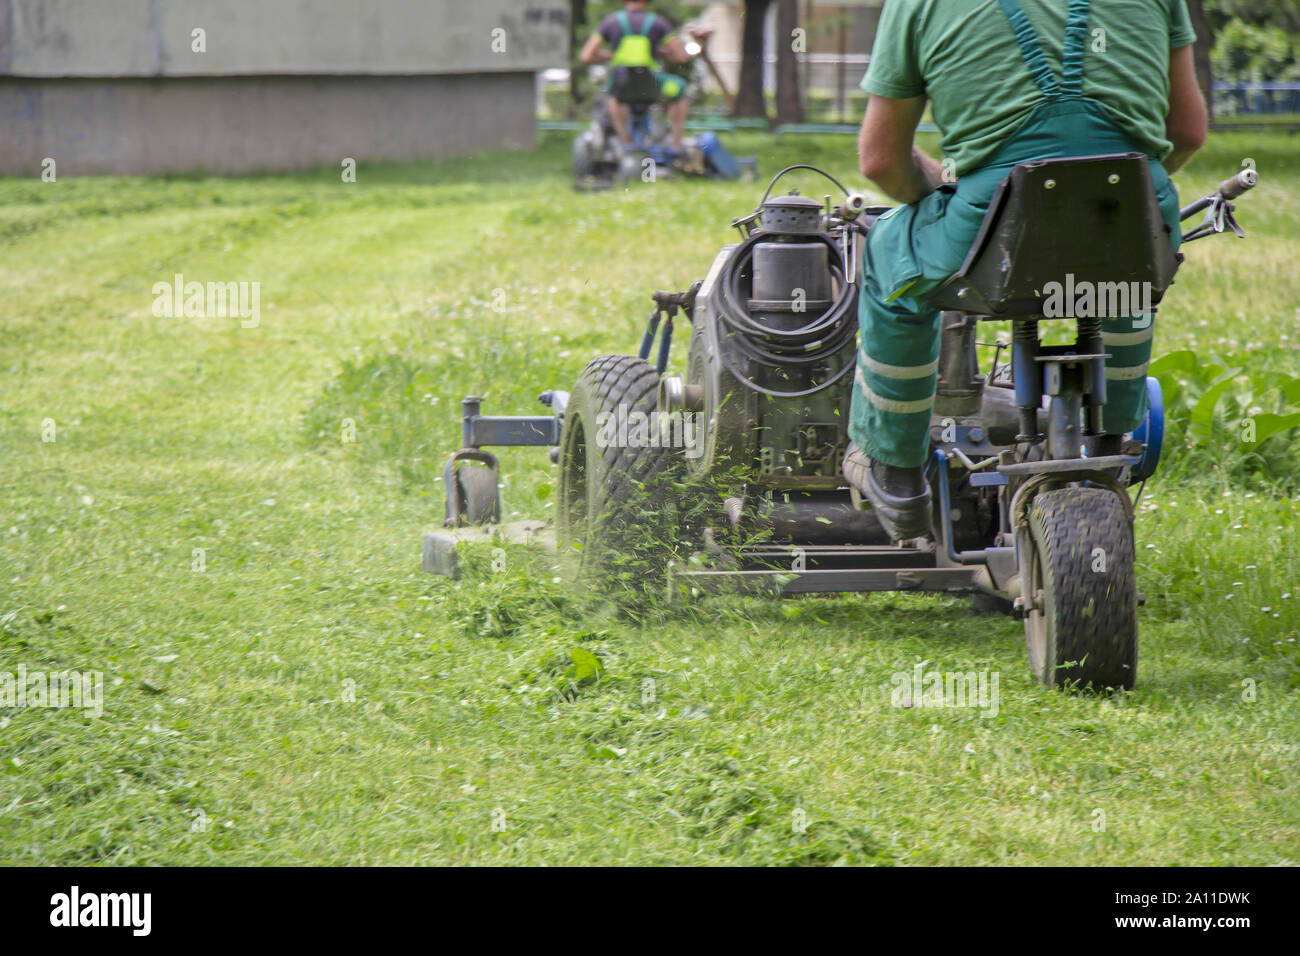 Worker mowing grass in a city park. Stock Photo